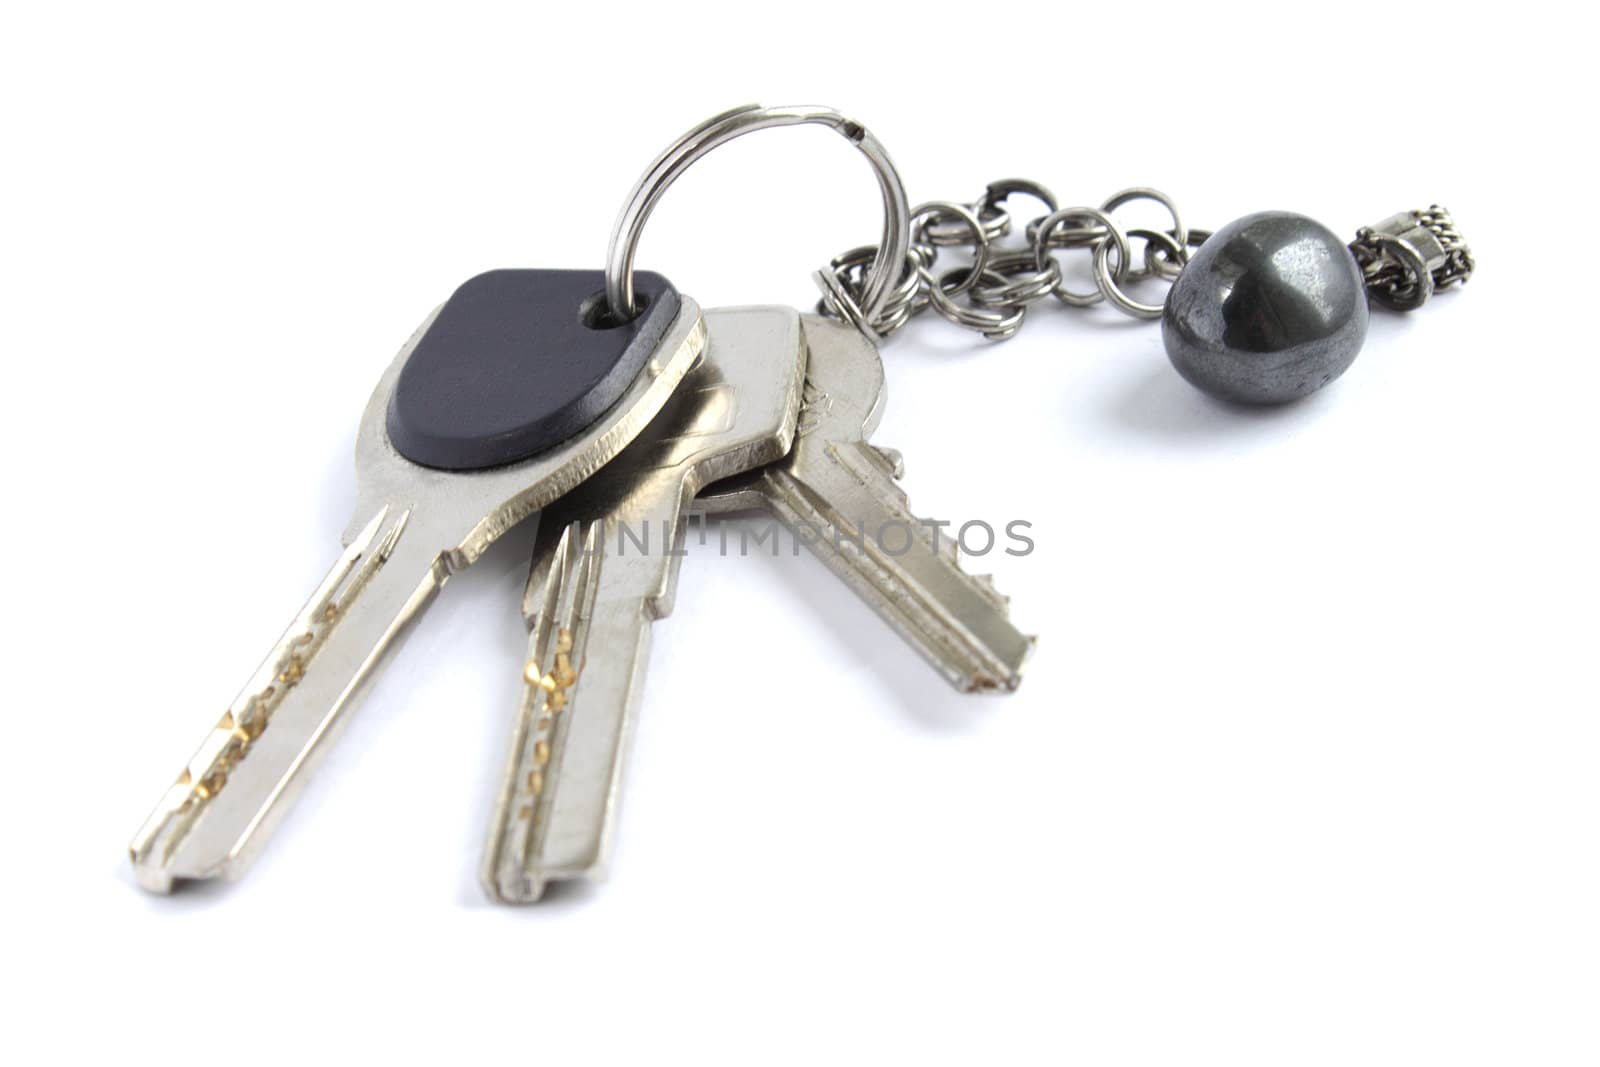 Bunch of keys isolated on white by pulen